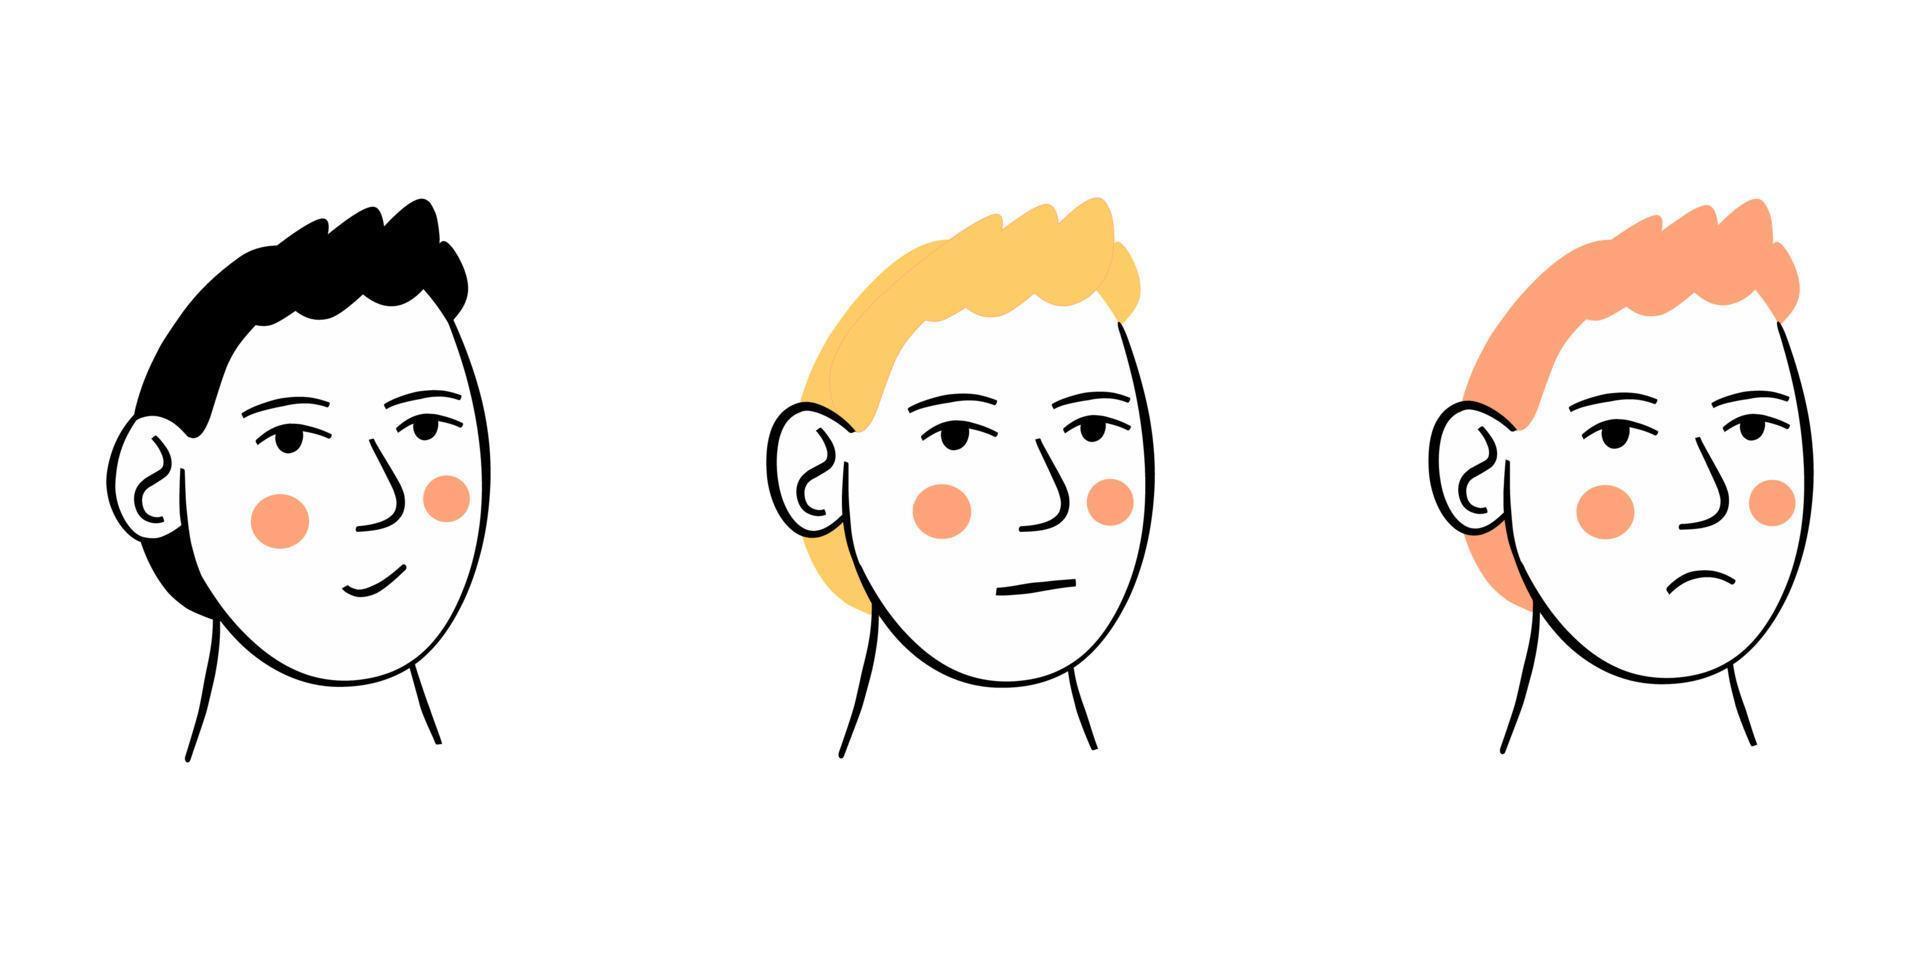 Faces of men with different emotions vector